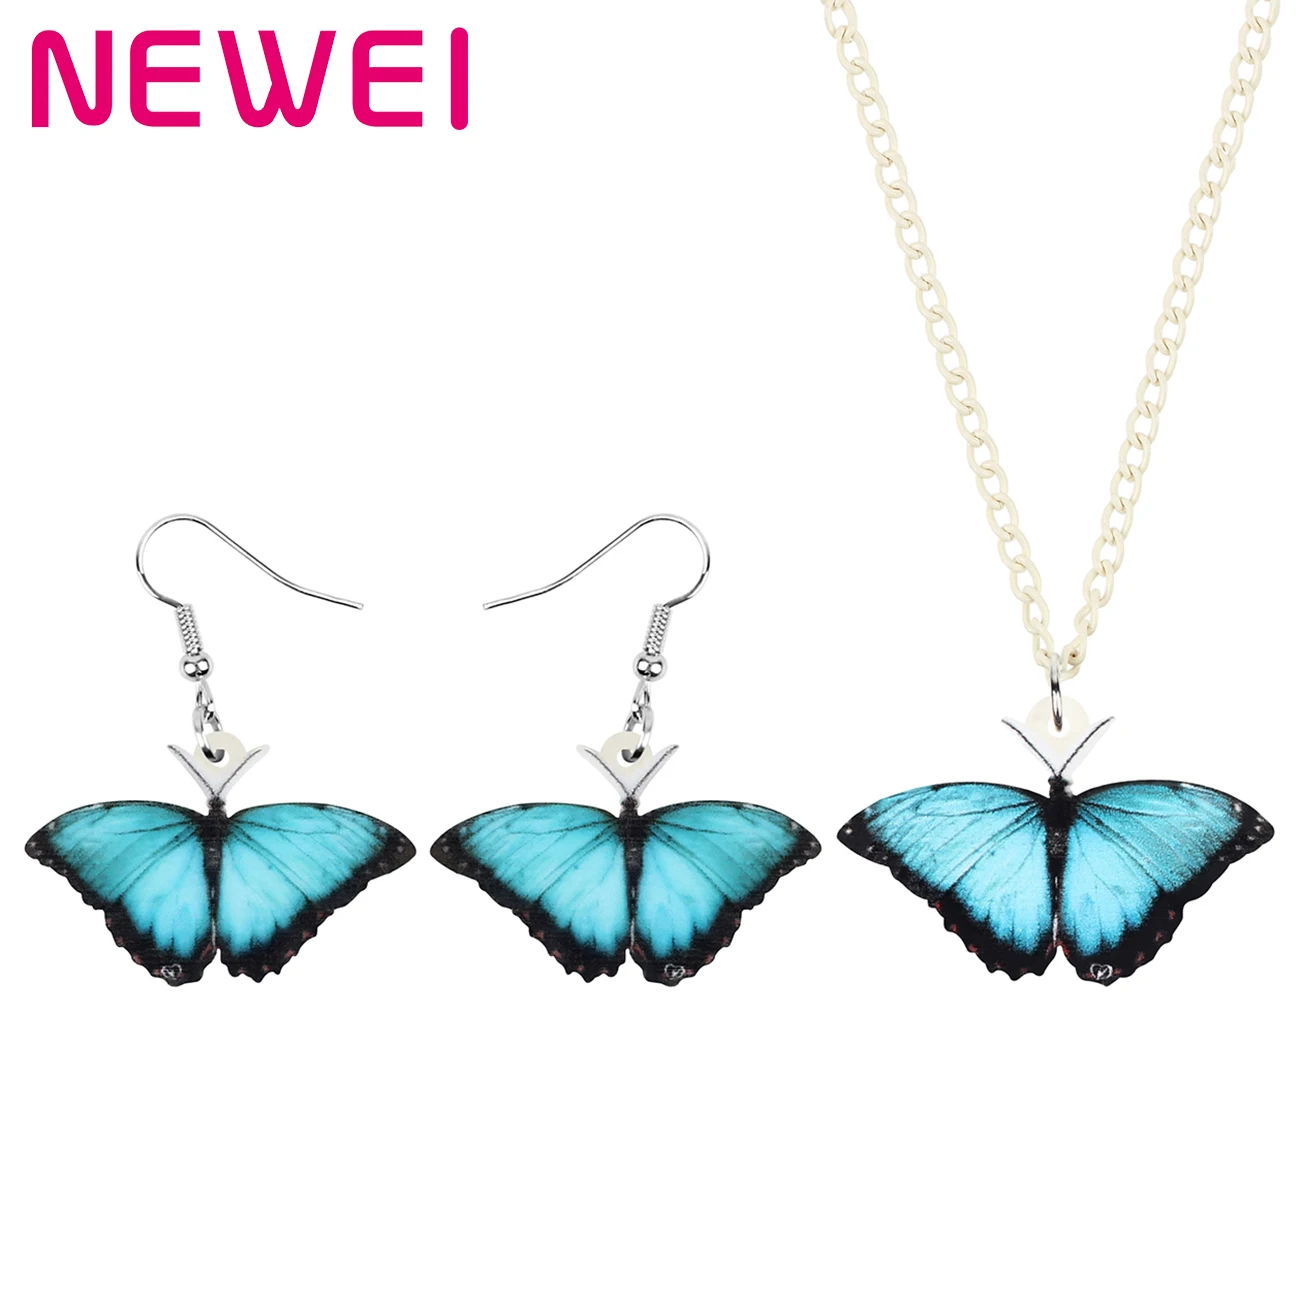 

Newei Acrylic Lovely Blue Morpho Butterfly Jewelry Sets Cute Animal Earrings Necklace For Women Kid Girl Birthday Party Charms